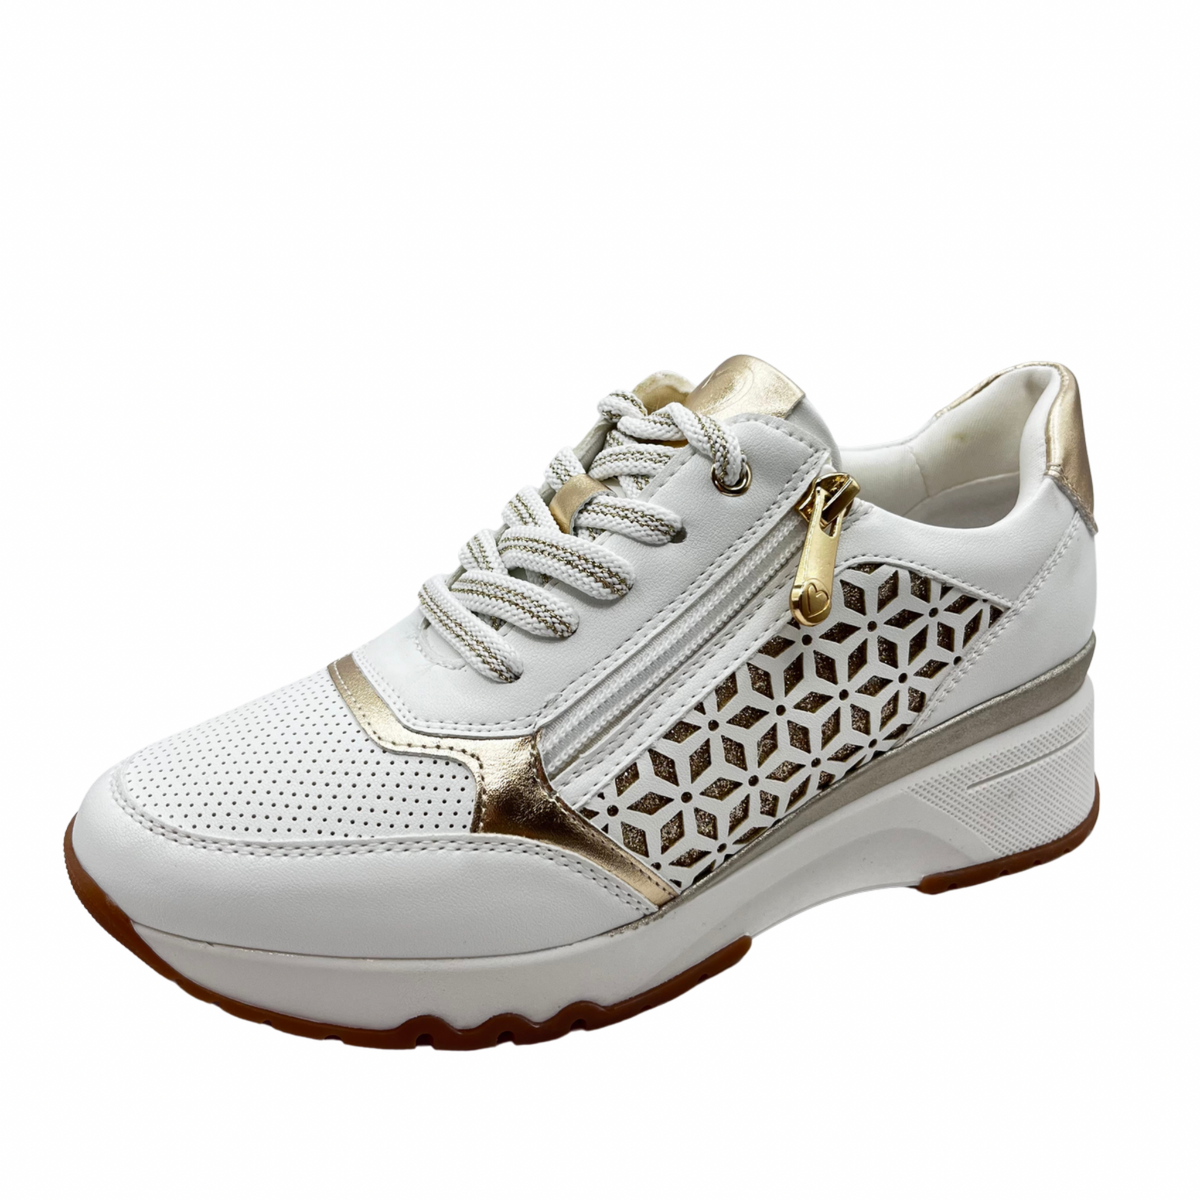 Marco Tozzi White and Gold Perforated Trainer